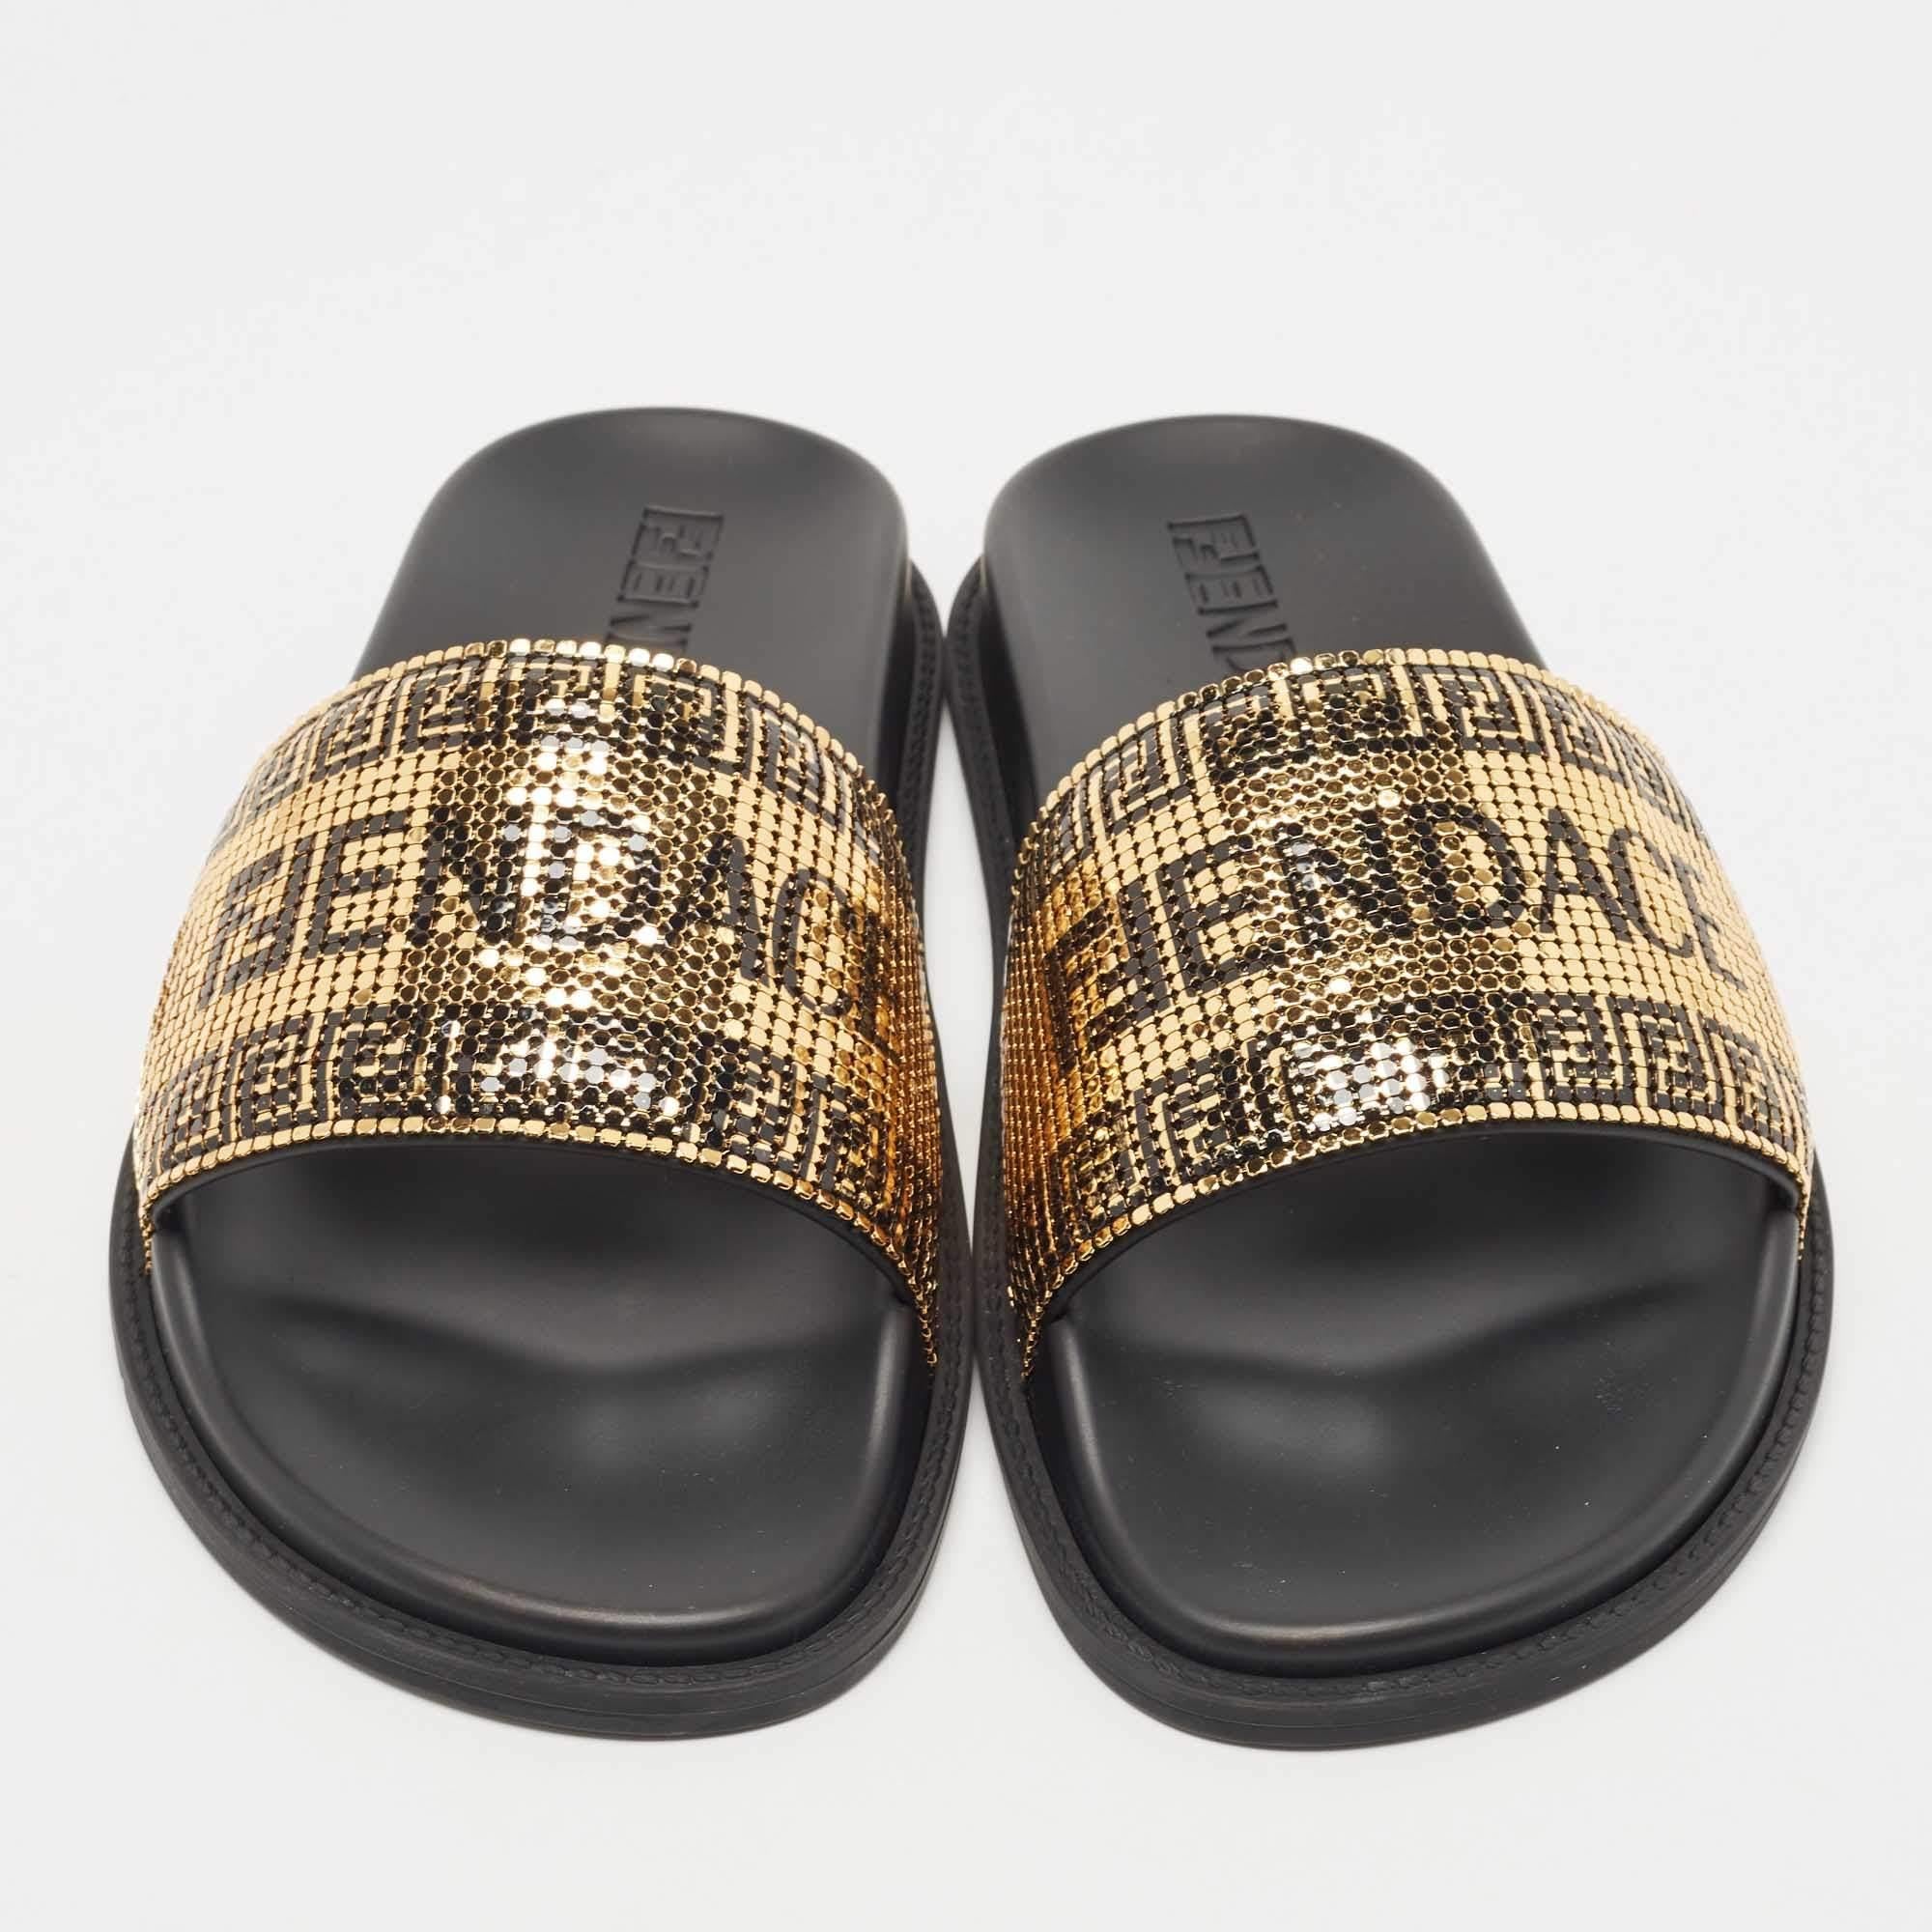 Create effortless styles with these Fendi x Versace flats. Made of quality materials, they are designed to elevate your OOTD and keep you in comfort all day long.

Includes: Original Dustbag, Original Box
